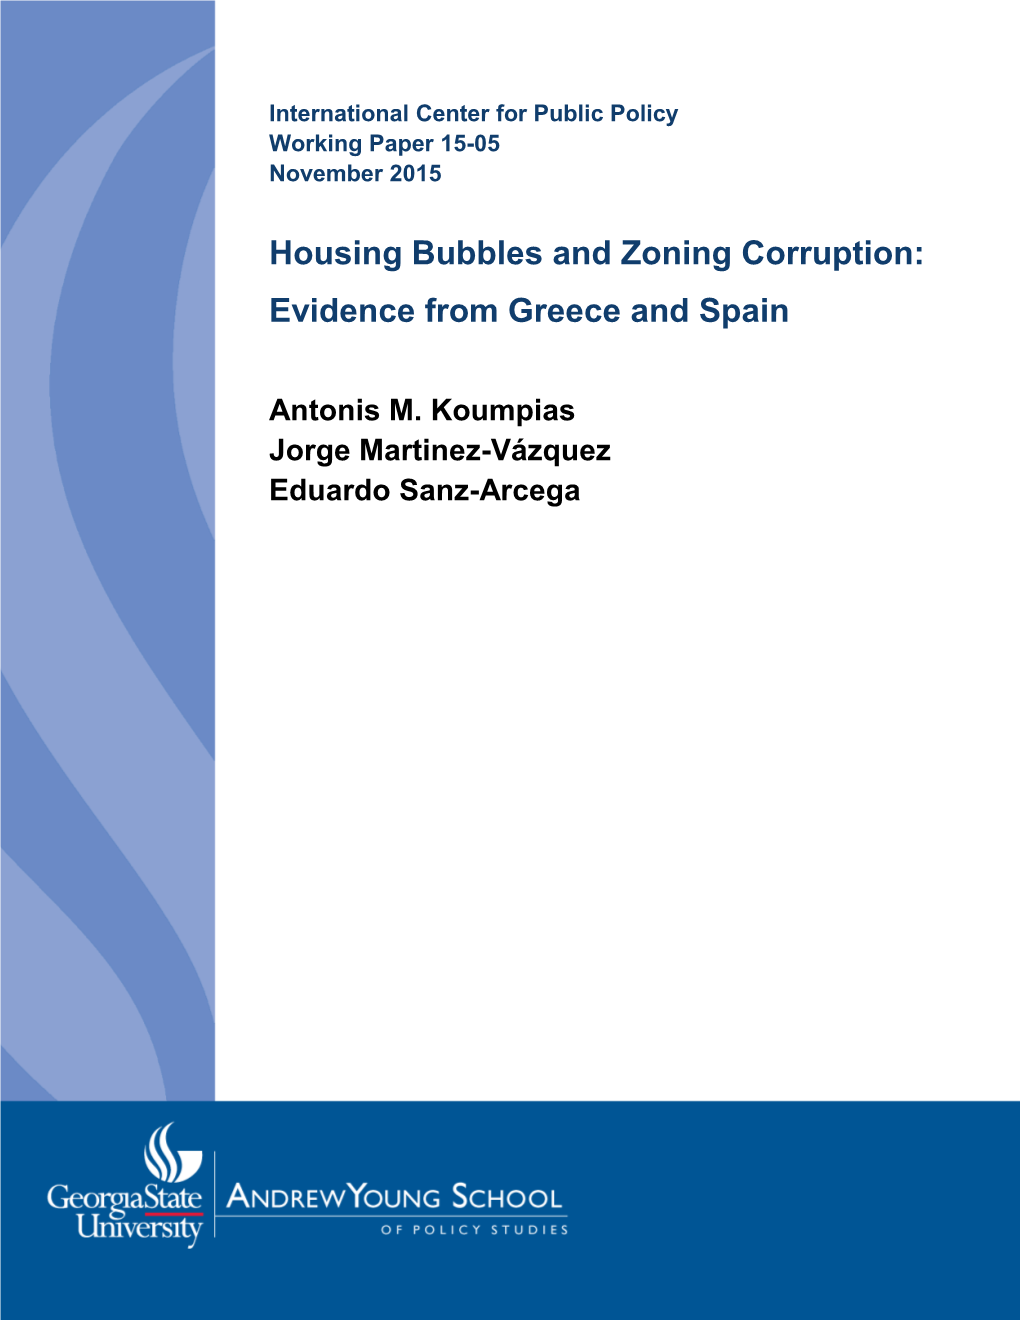 Housing Bubbles and Zoning Corruption: Evidence from Greece and Spain